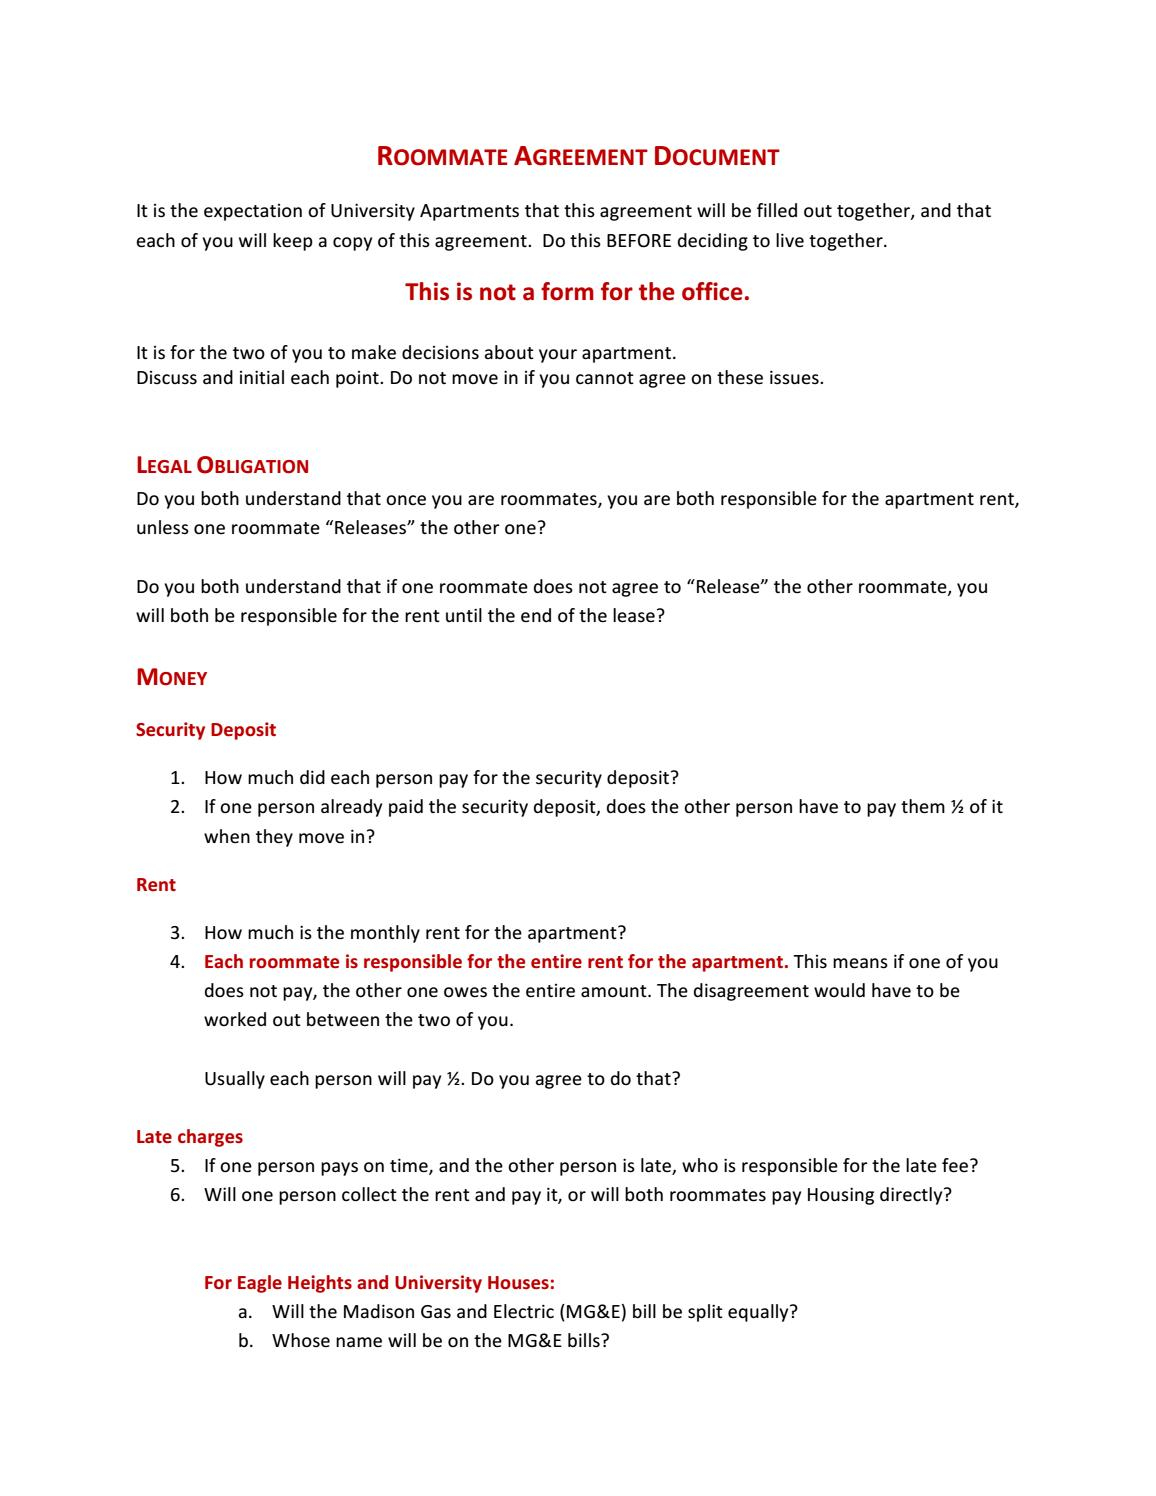 University Apartments Roommate Agreement by UW Madison Housing - issuu Within Security Deposit Agreement Between Roommates Within Security Deposit Agreement Between Roommates